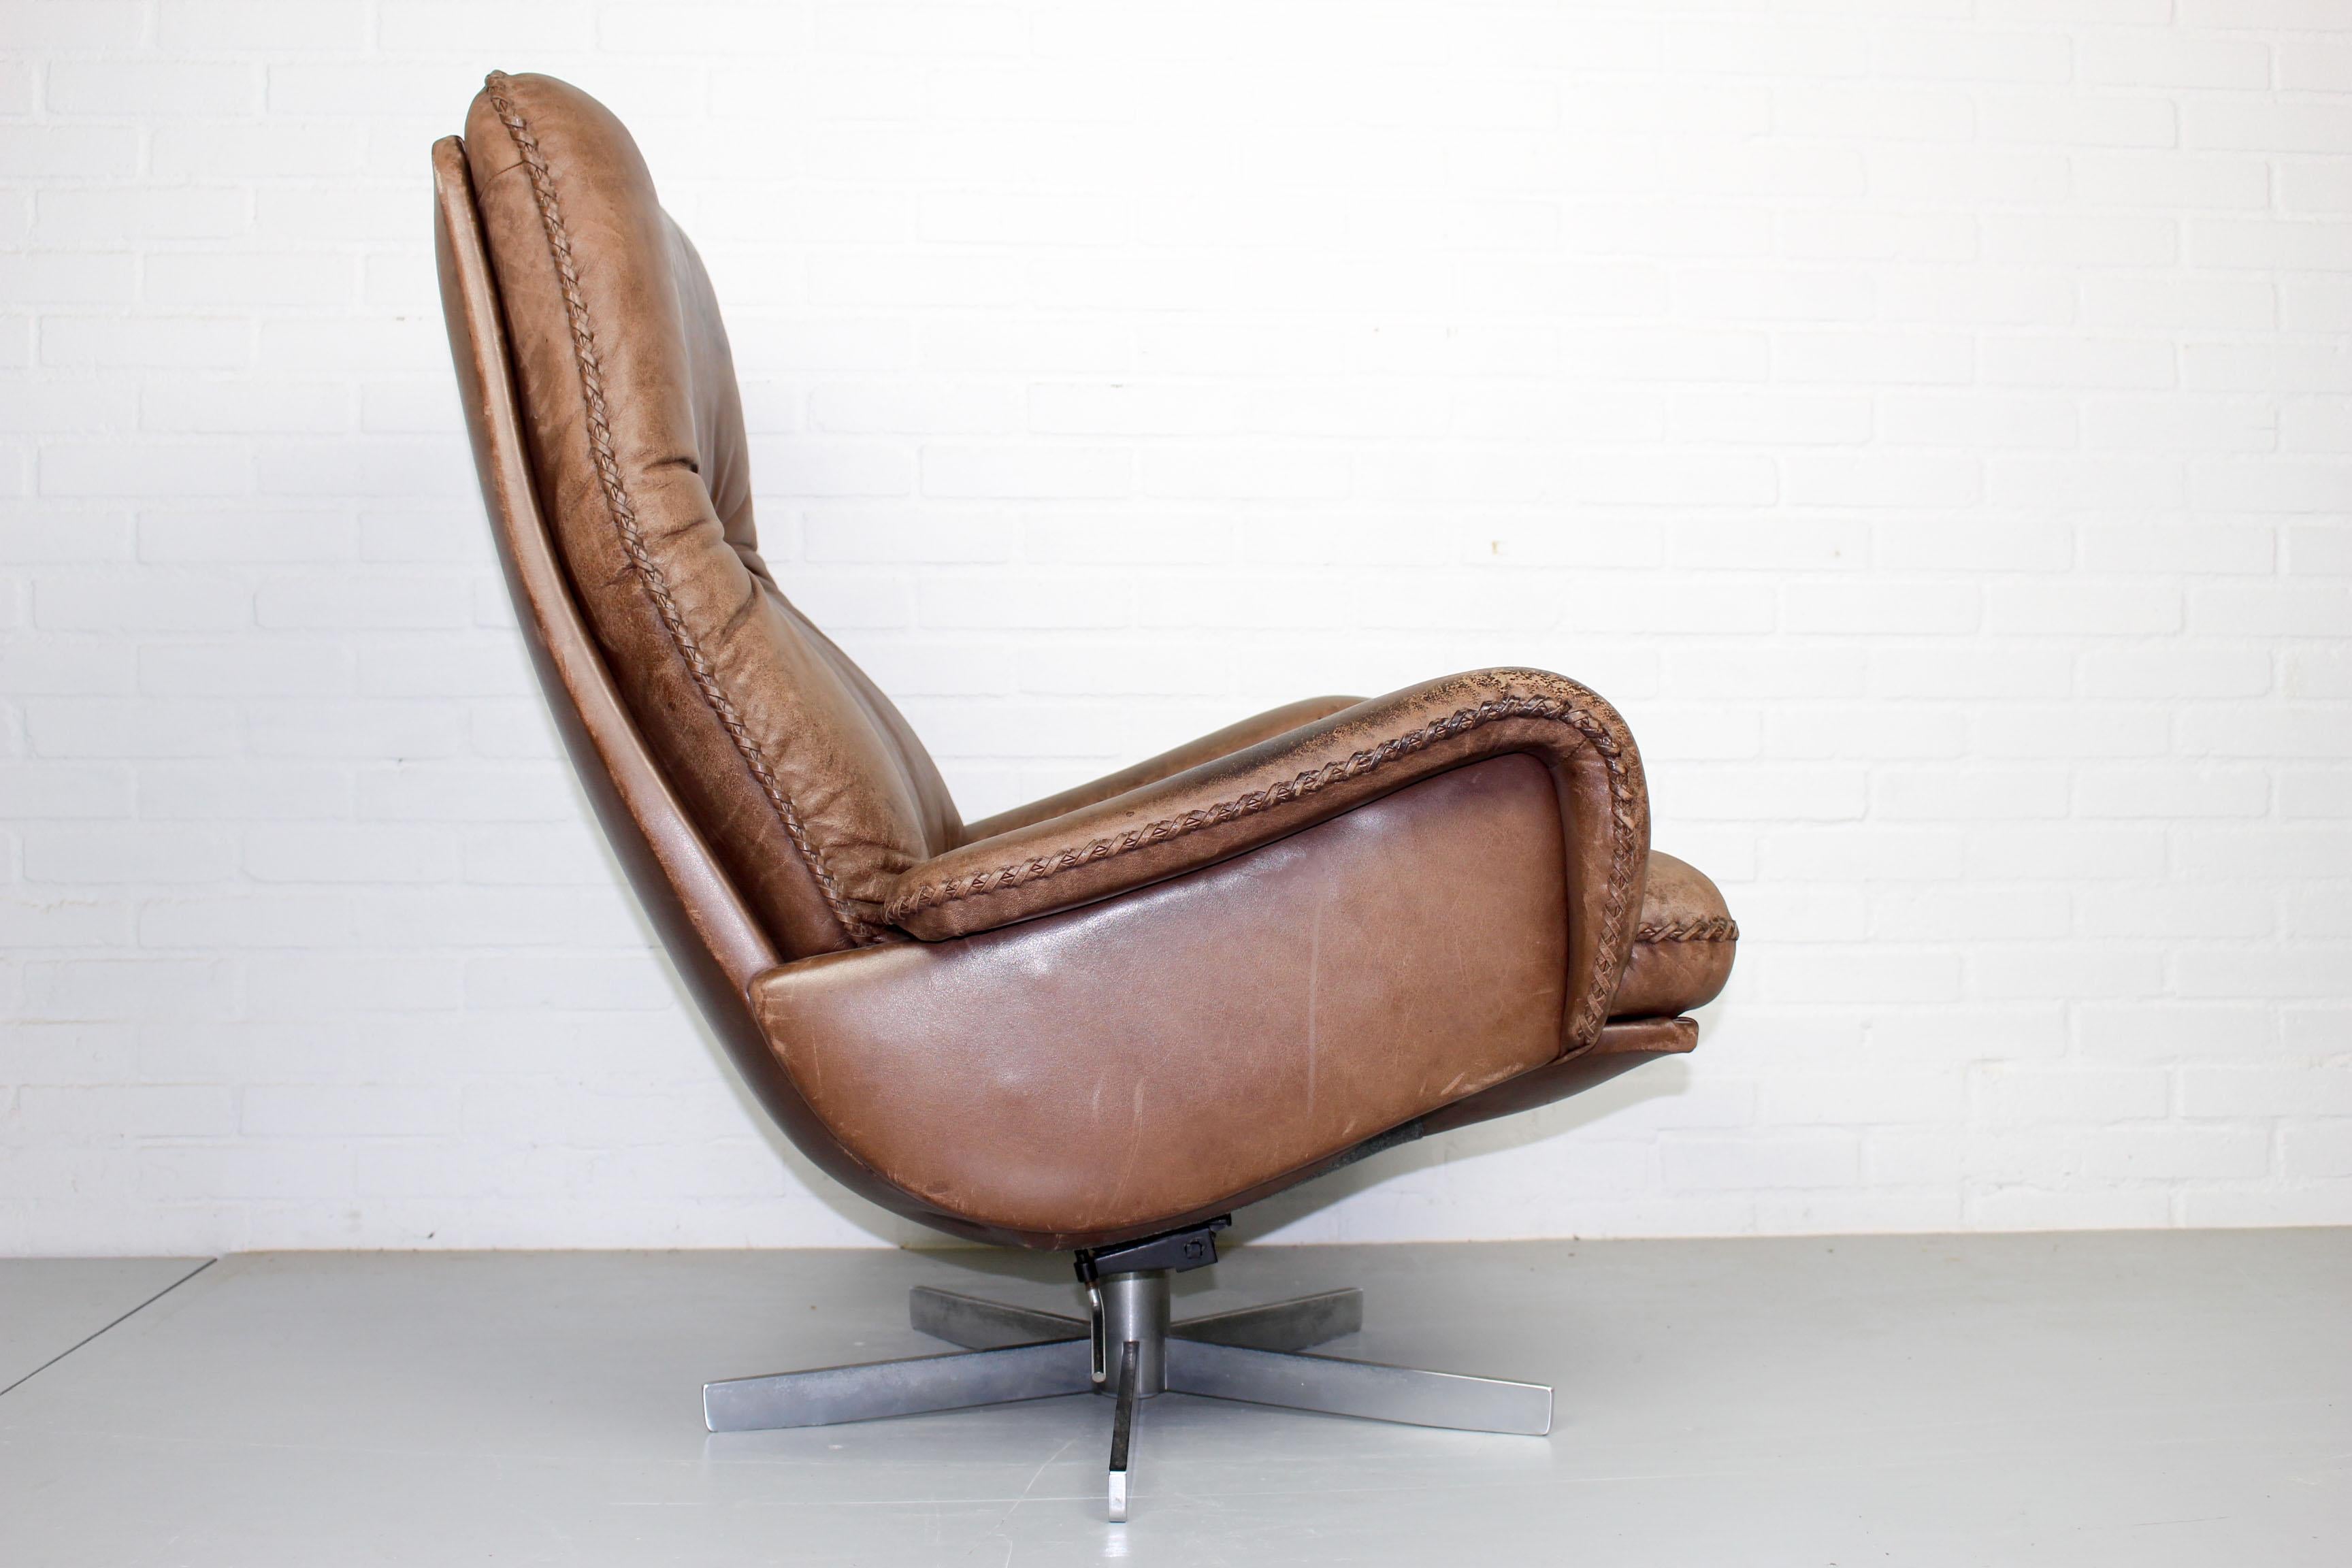 Rare and highly desirable De Sede S 231 vintage lounge swivel club armchair. This chair was produced by De Sede, Switzerland in the late 1960s. In the James Bond film, On Her Majesty’s Secret Service, this chair was used. Upholstered in beautifully